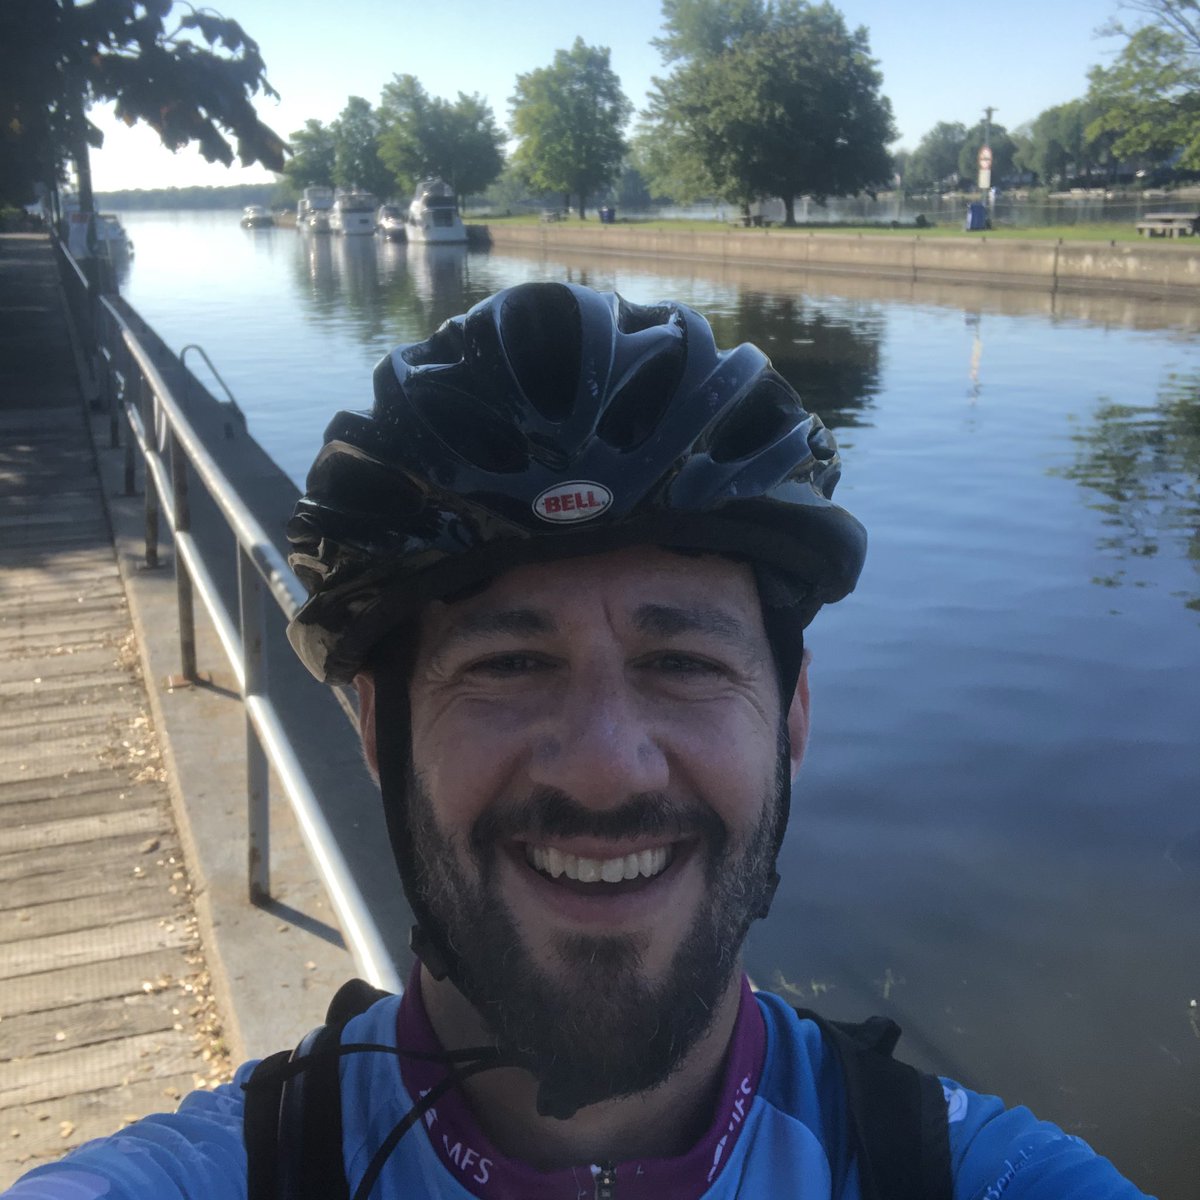 First rest stop in effect at the western tip of MTL. Awesome riding so far, beat the crowds on the canal. Next stop - Ile Bizard!  #PMC2020  #PMCReimagined